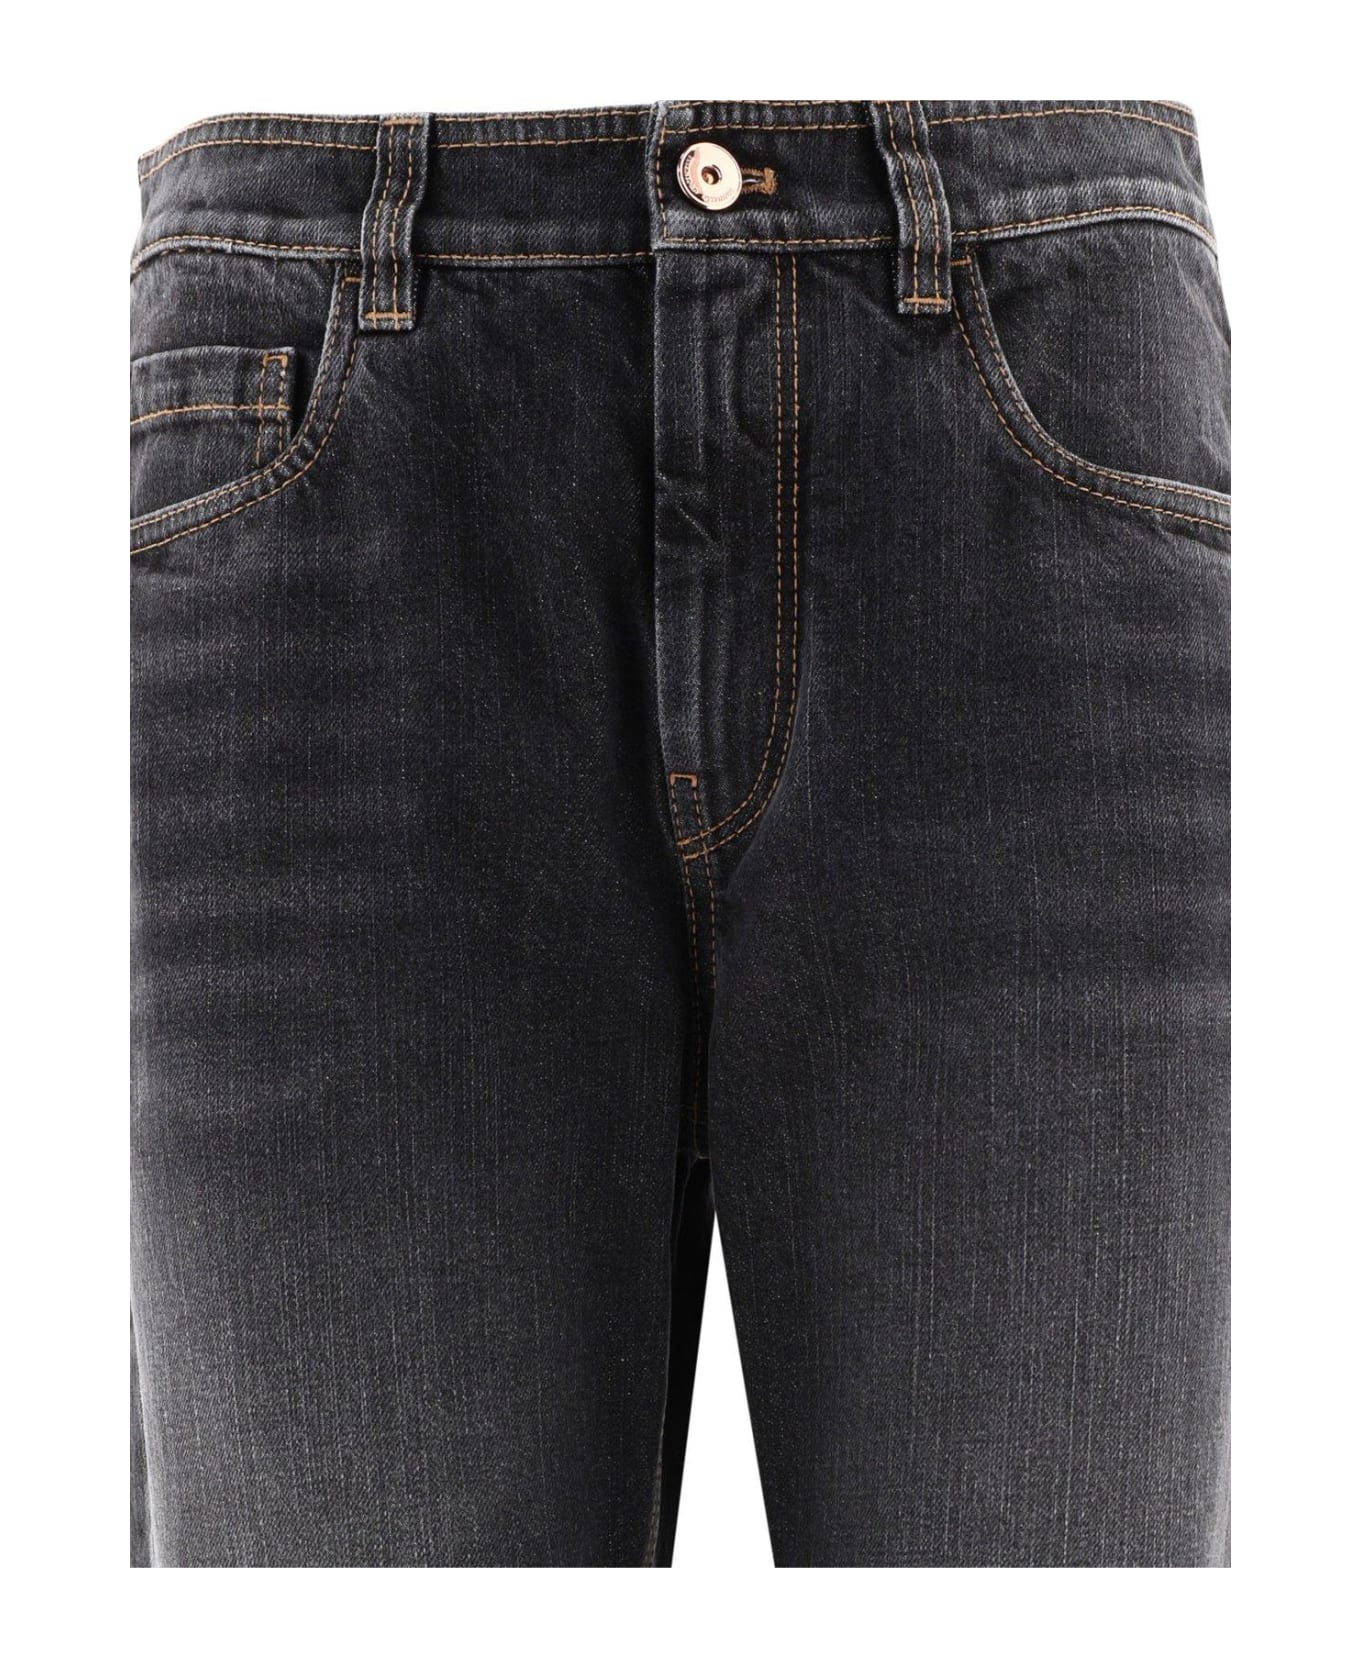 Brunello Cucinelli Button Detailed Tapered Jeans - BLACK